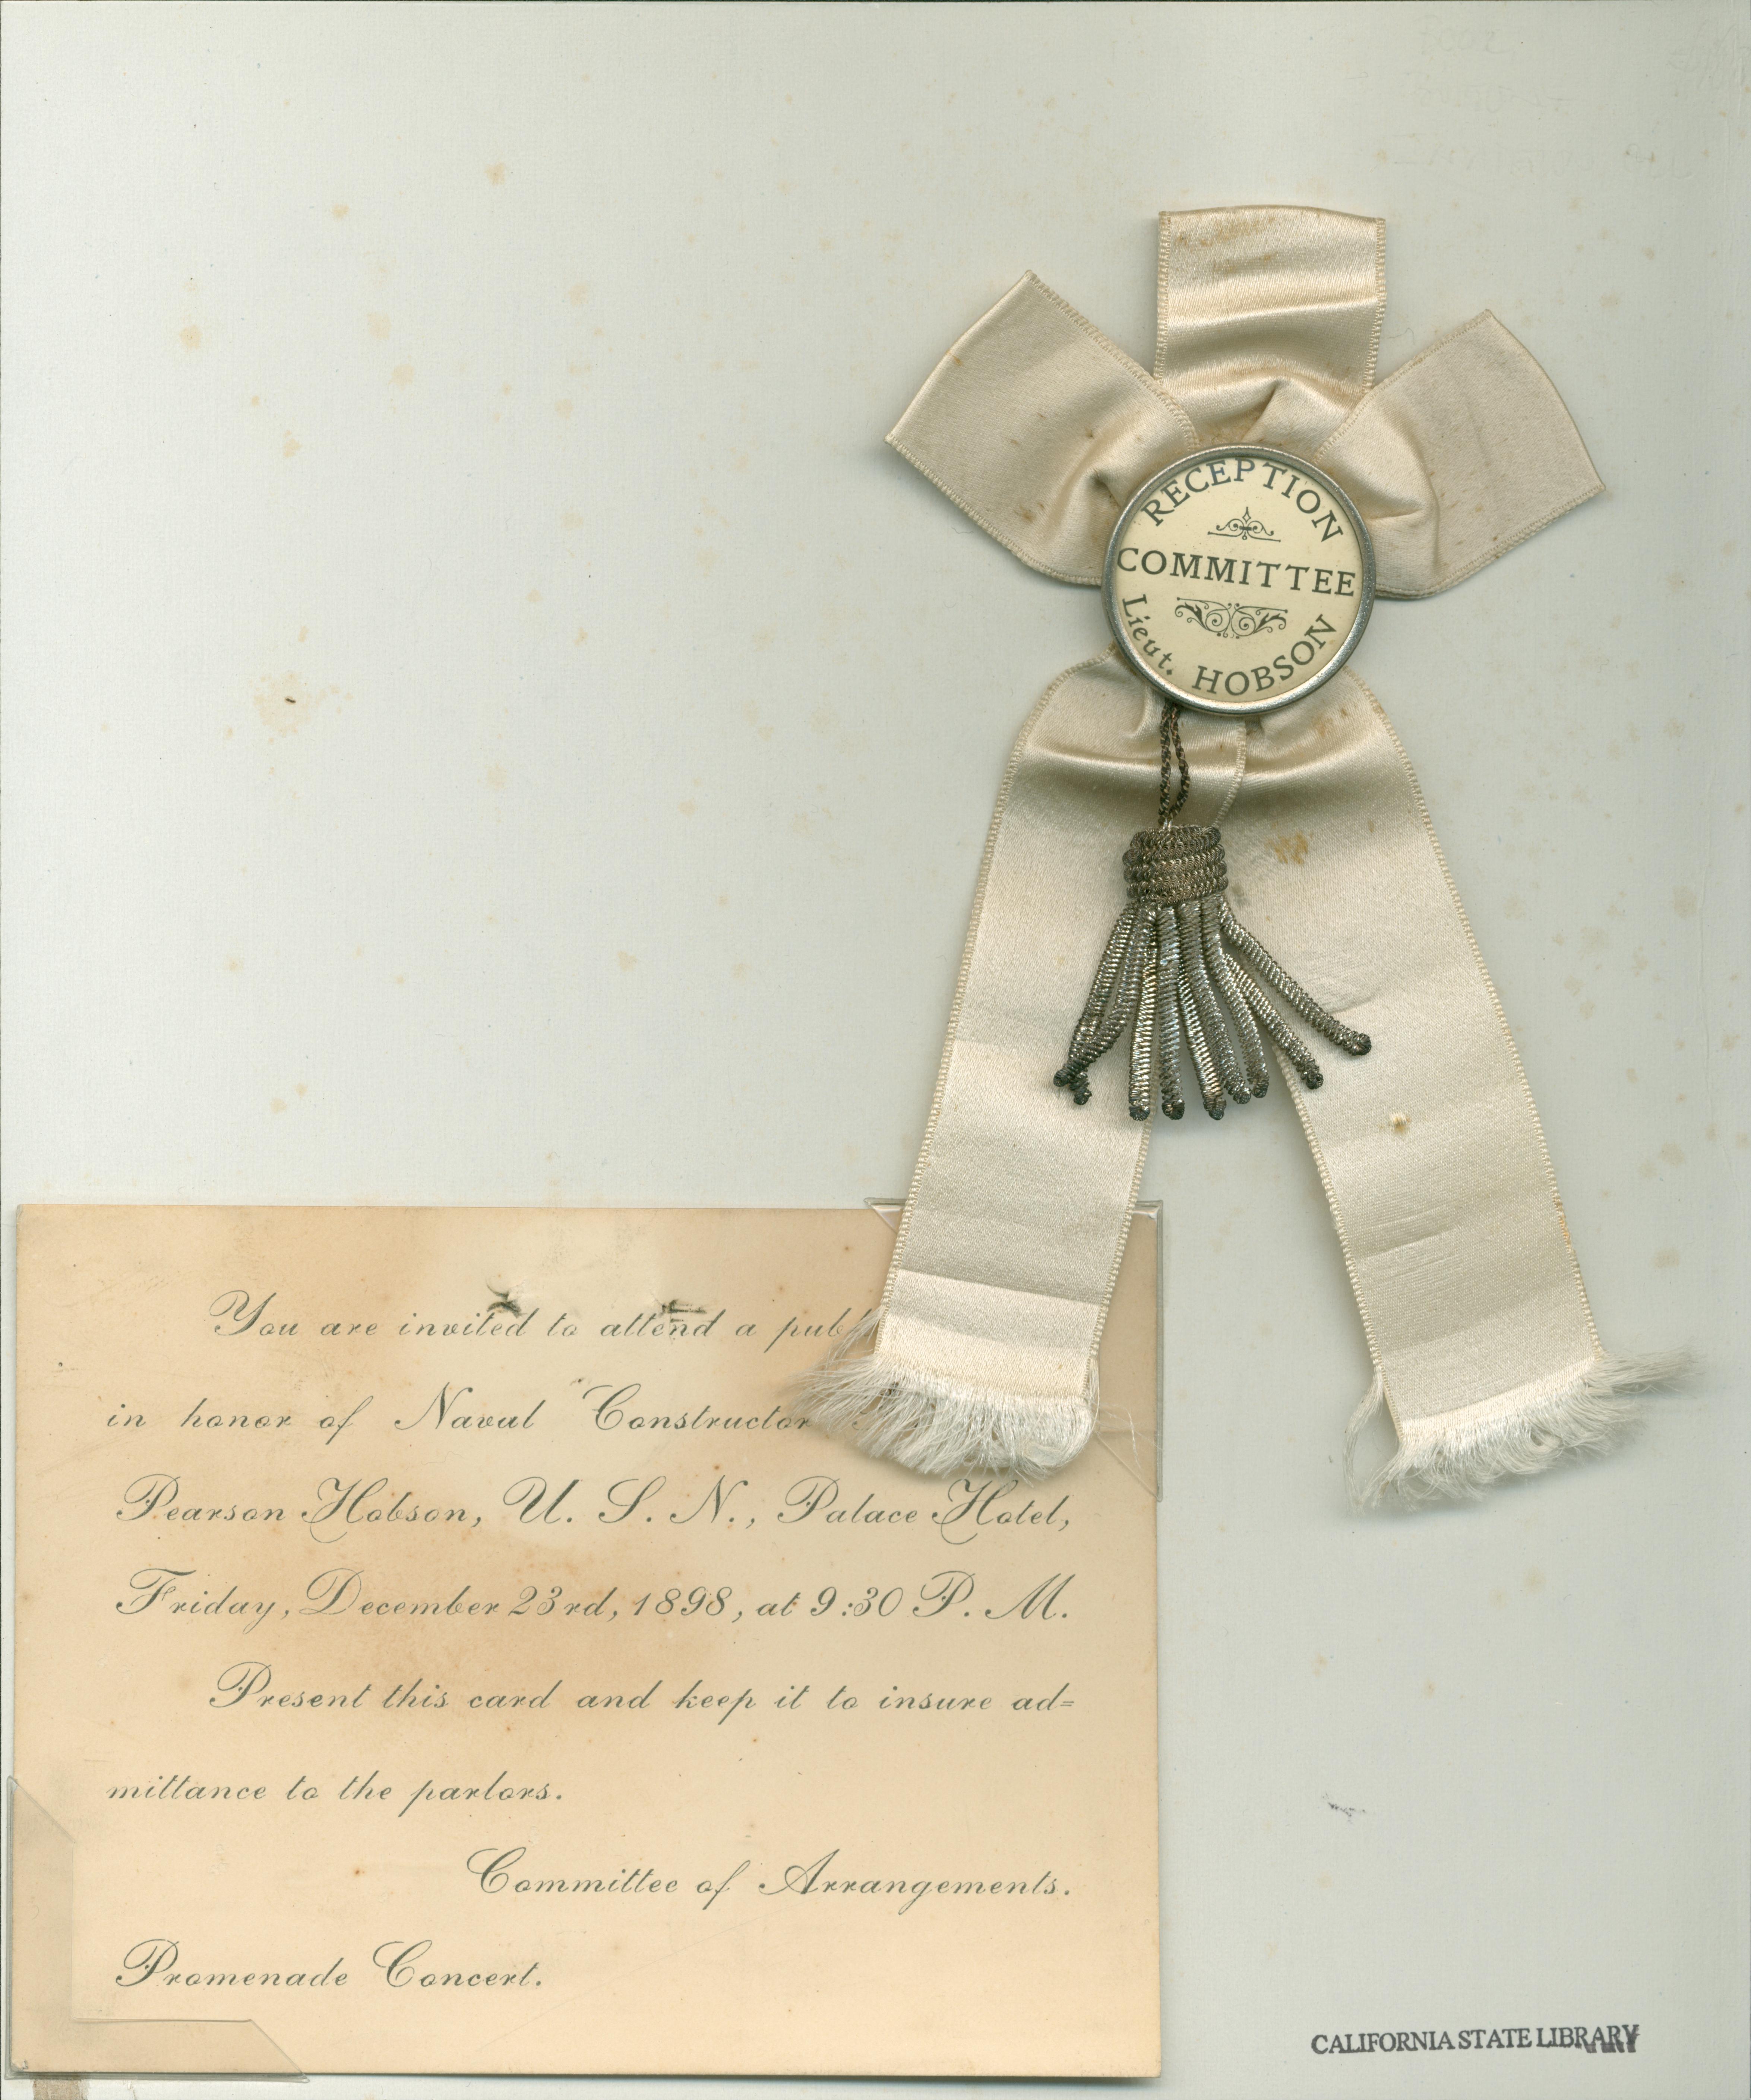 Invitation to reception honoring Naval Constructor Richmond Pearson Hobson at the Palace Hotel on December 23, 1898.  Includes button for Reception Committee with ribbon and silver-gilt tassel.